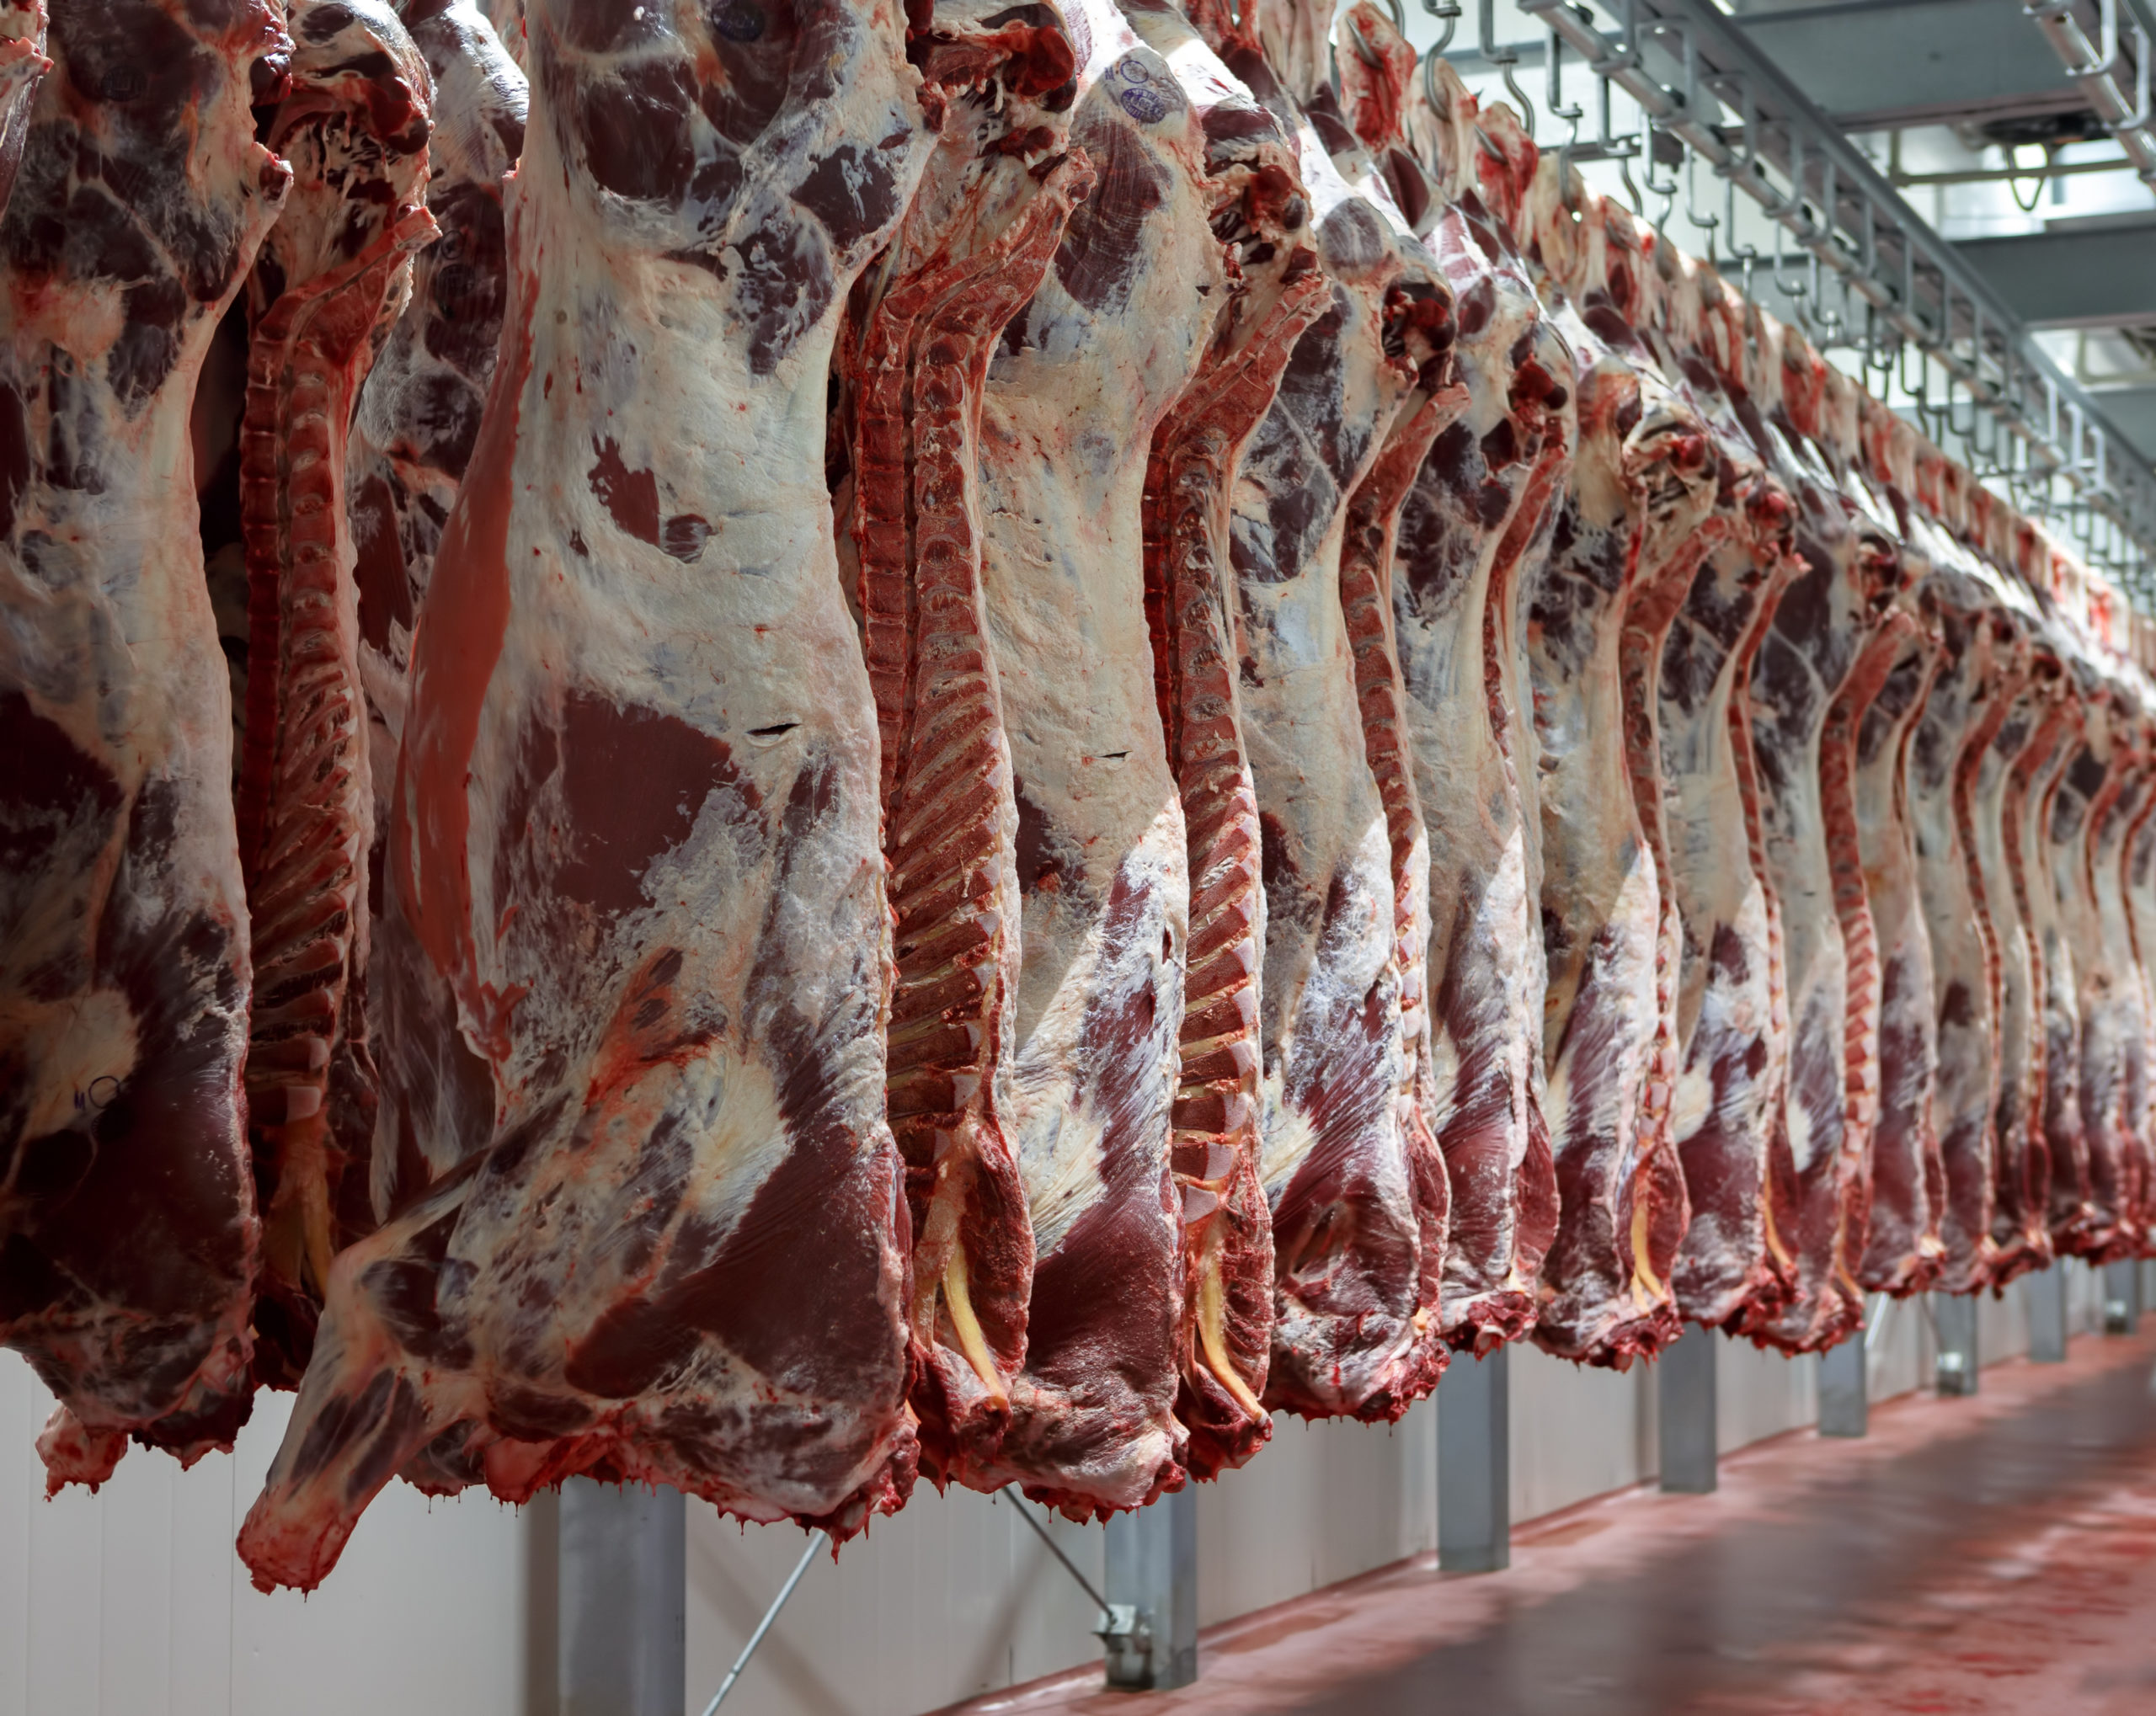 After slaughter, all animals undergo post-mortem meat inspection by an offi...